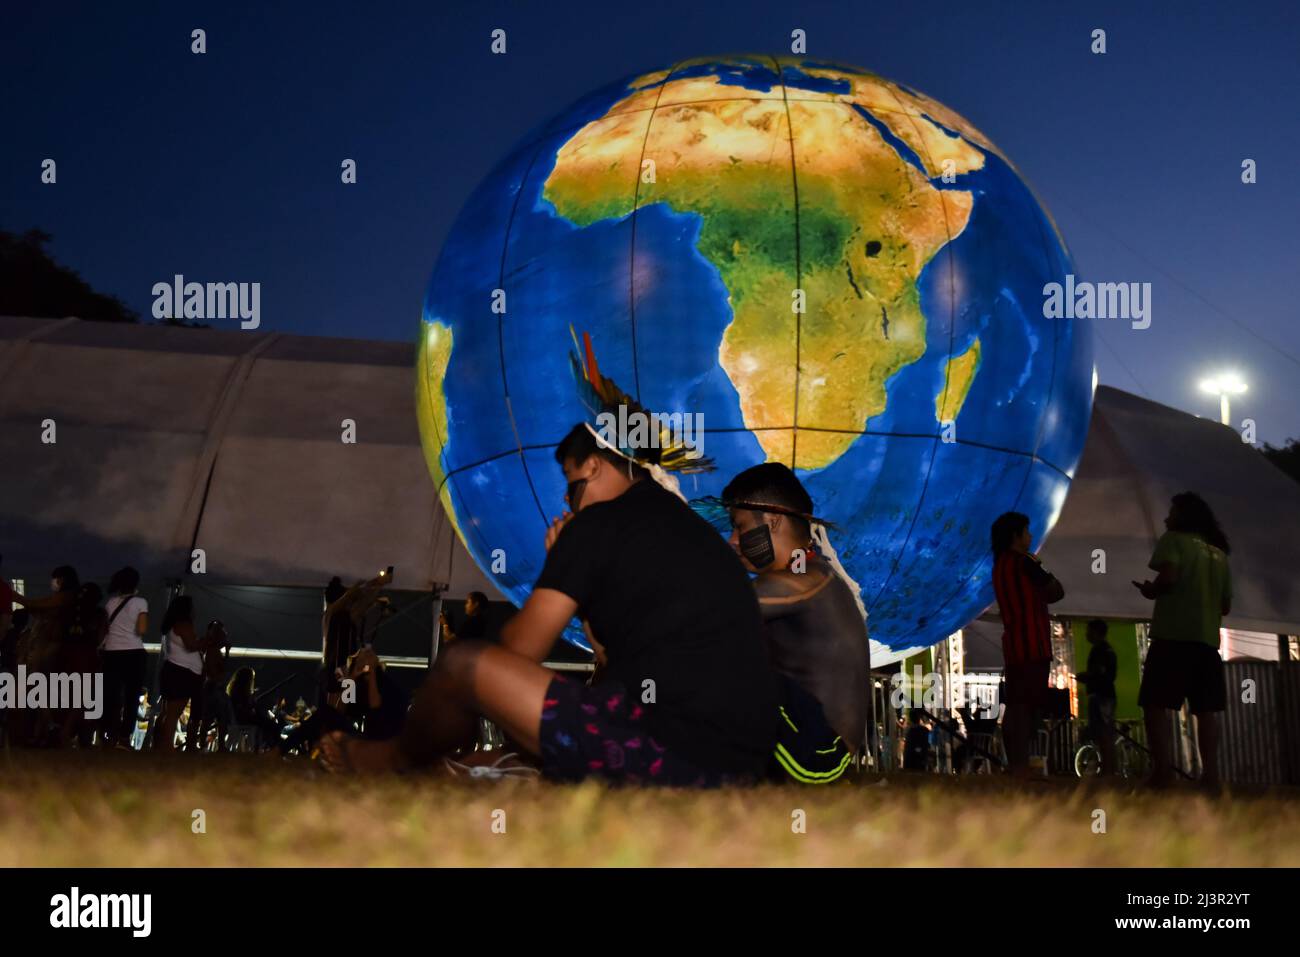 The 18th Indigenous Free Land Camp (Acampamento Terra Livre) entered its 5th day of event in Brasília, DF, Brazil, on April 8, 2022. The event happens annually, aiming to give visibility to the Indigenous fight for their constitutional rights.  (Photo by Antonio Molina/Fotoarena/Sipa USA) Stock Photo